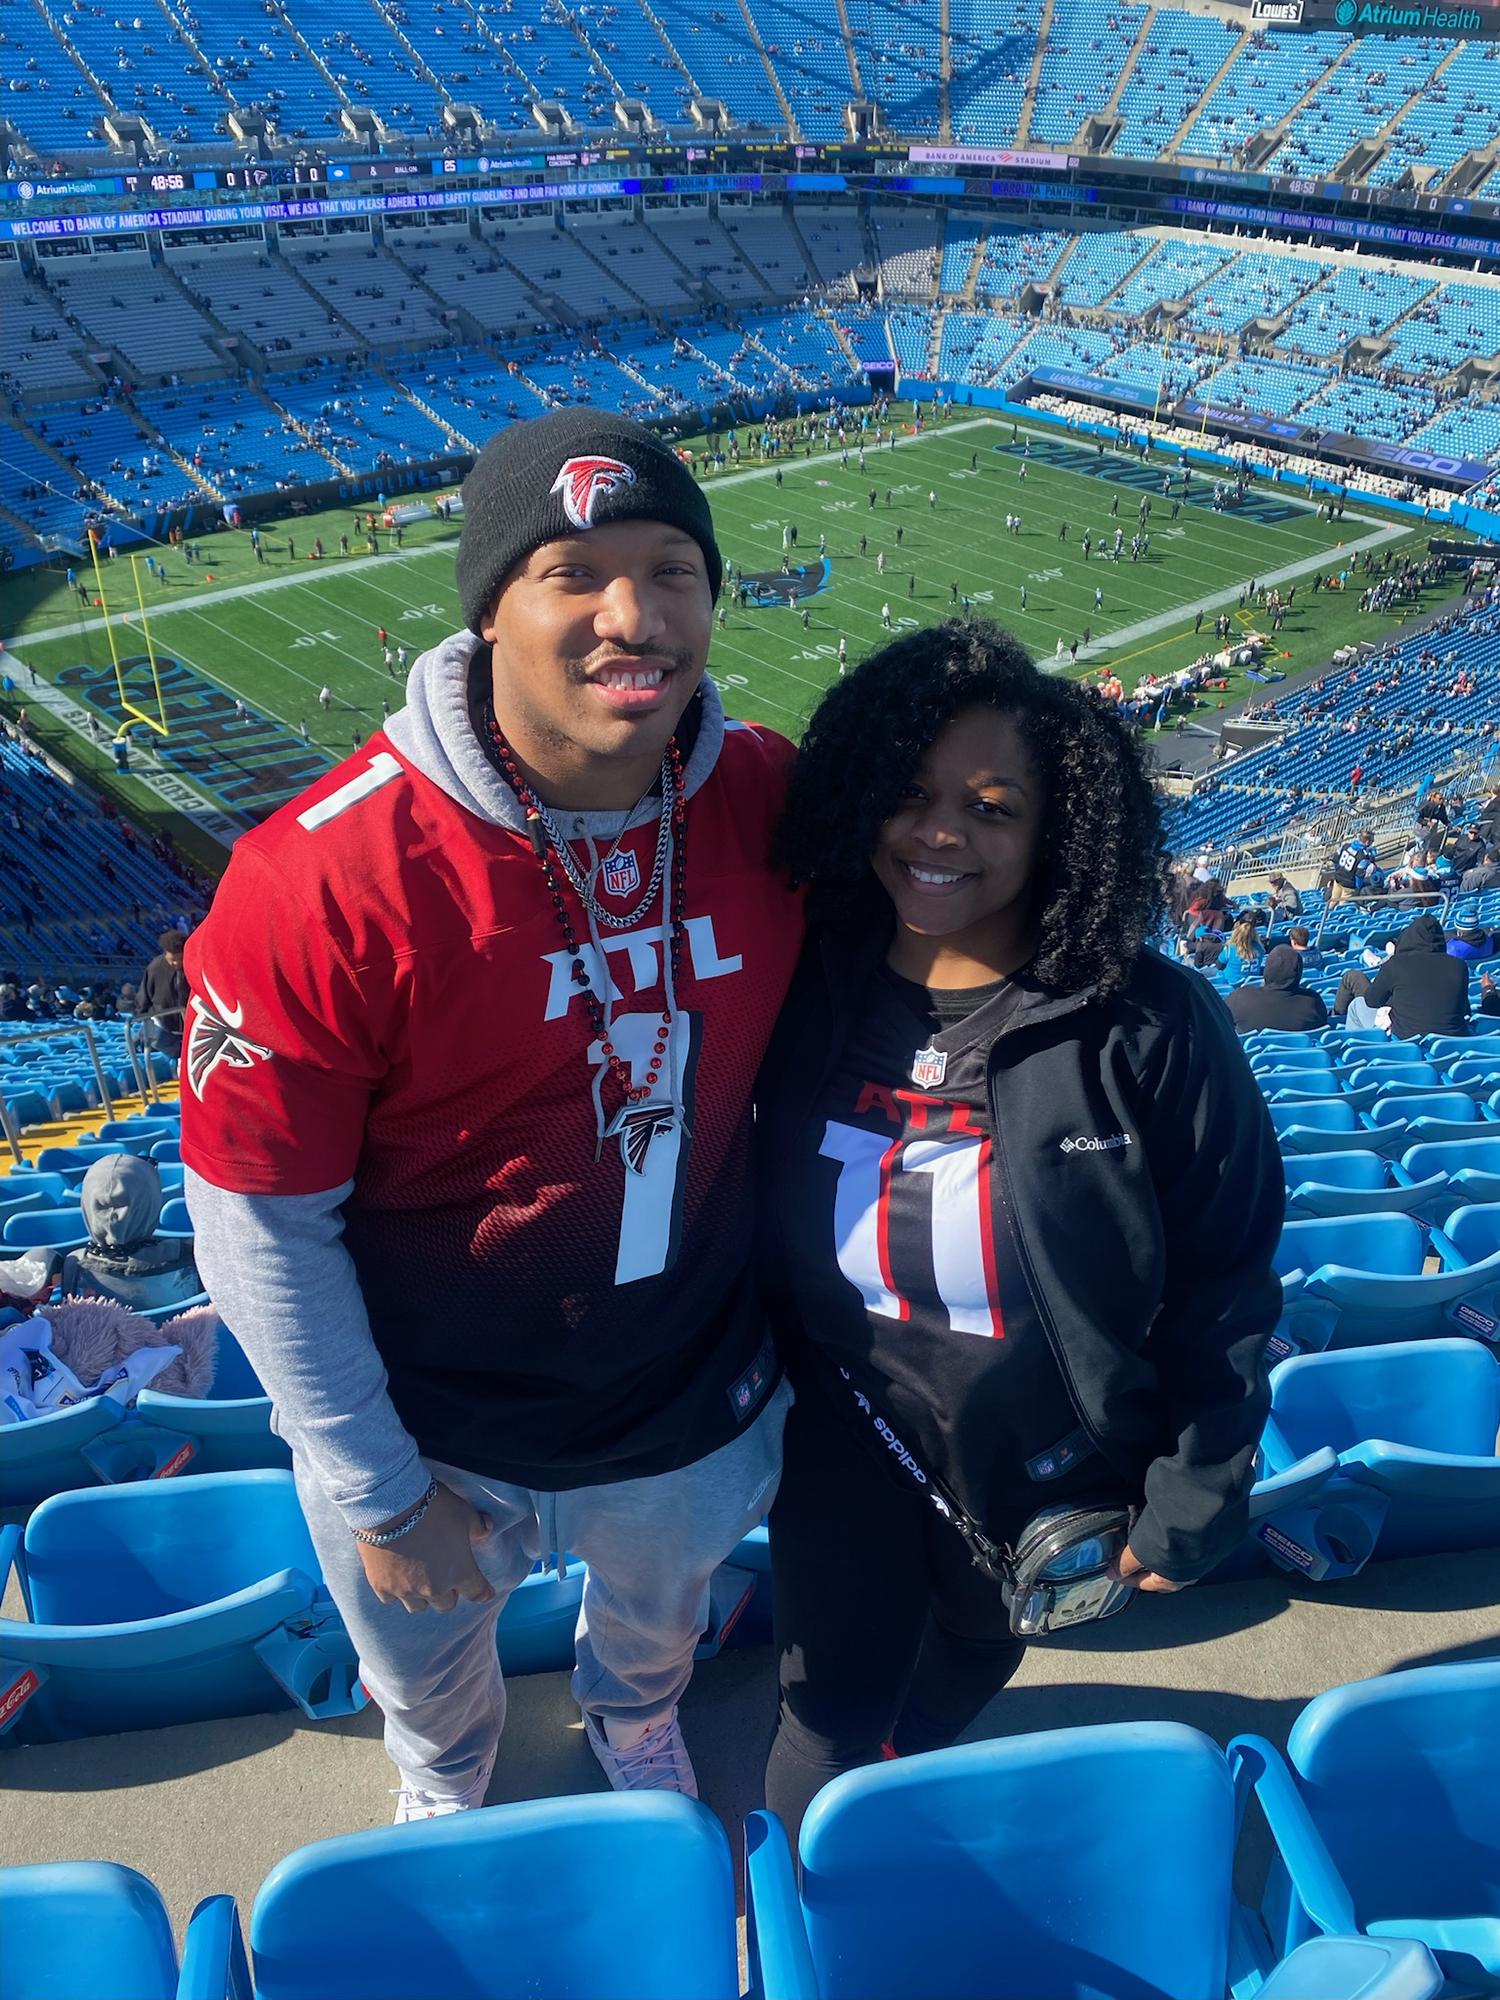 We traveled to North Carolina to see the Falcons vs Panthers.